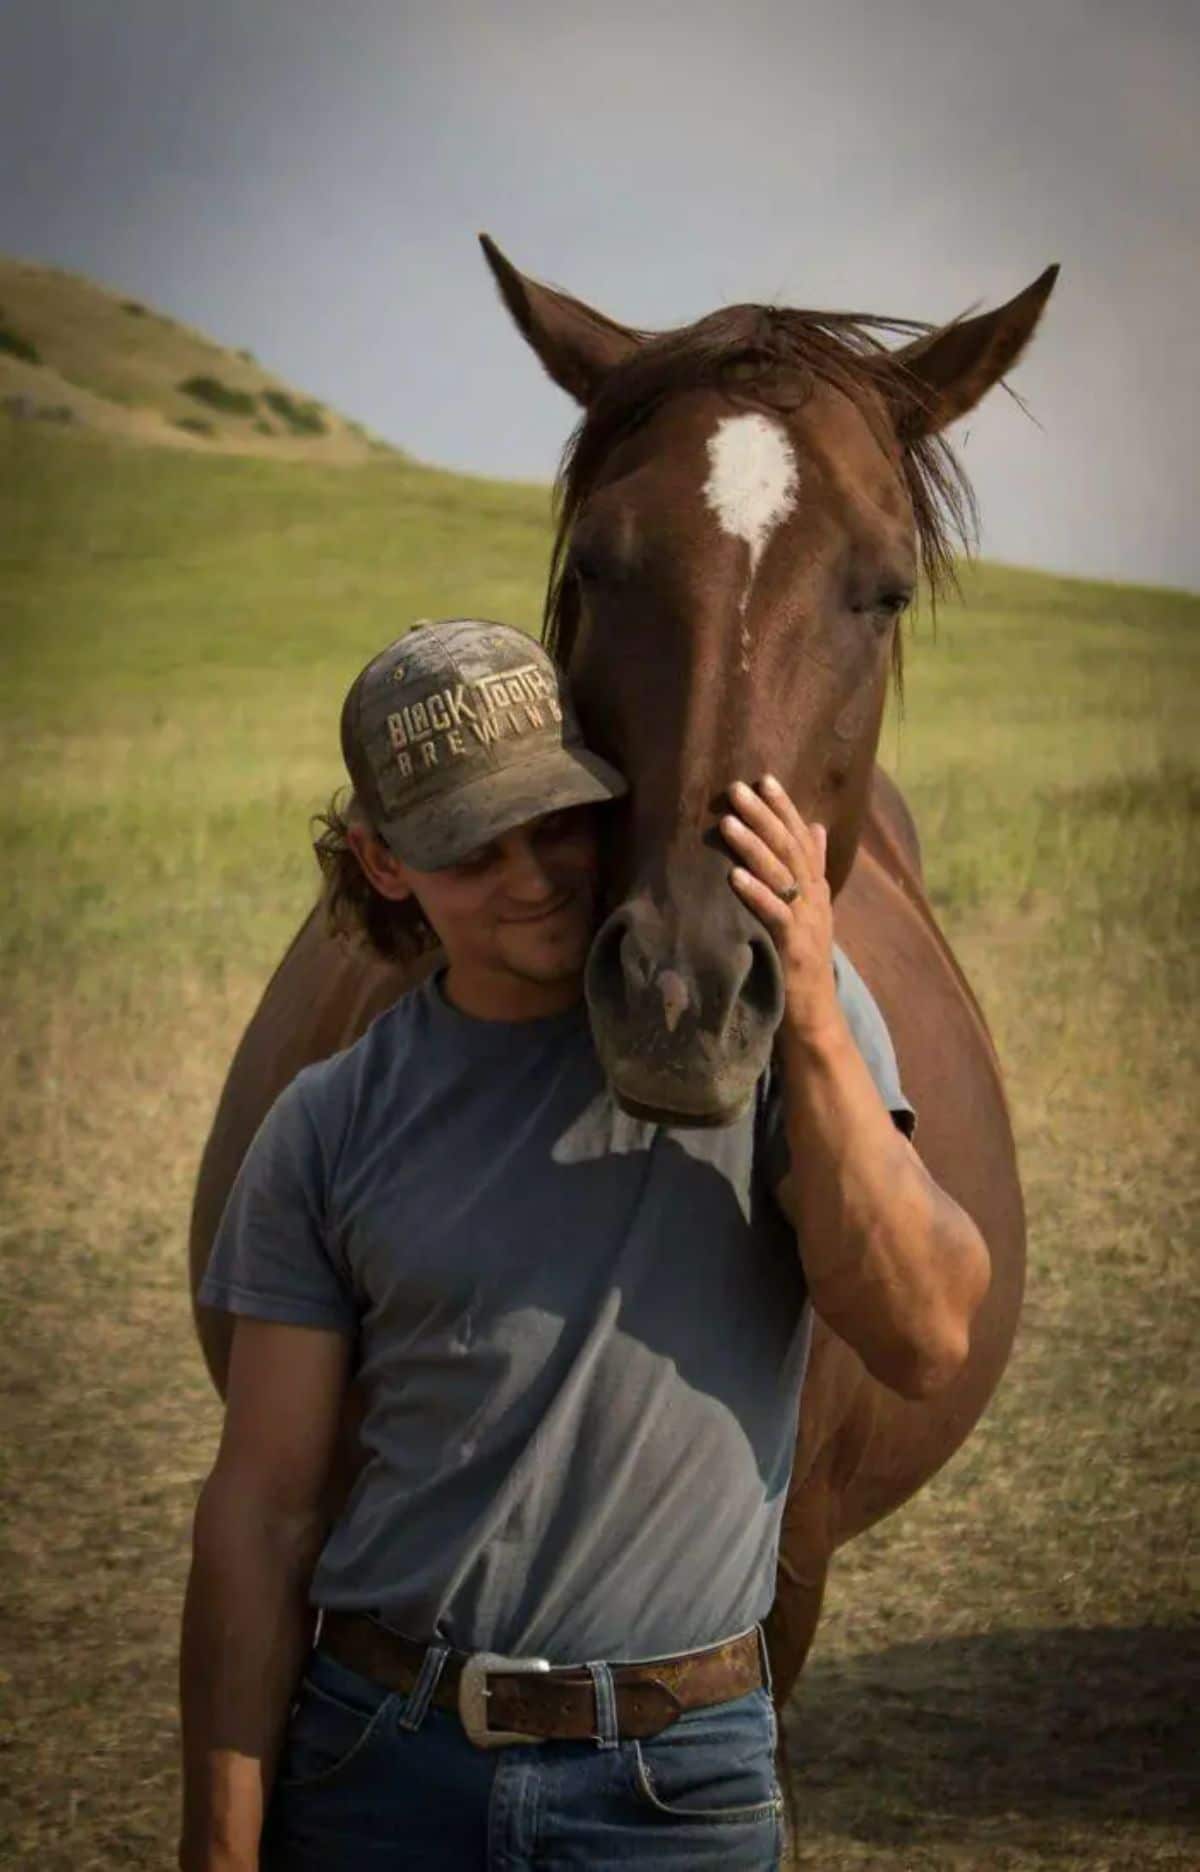 brown horse nuzzling a man wearing a cap